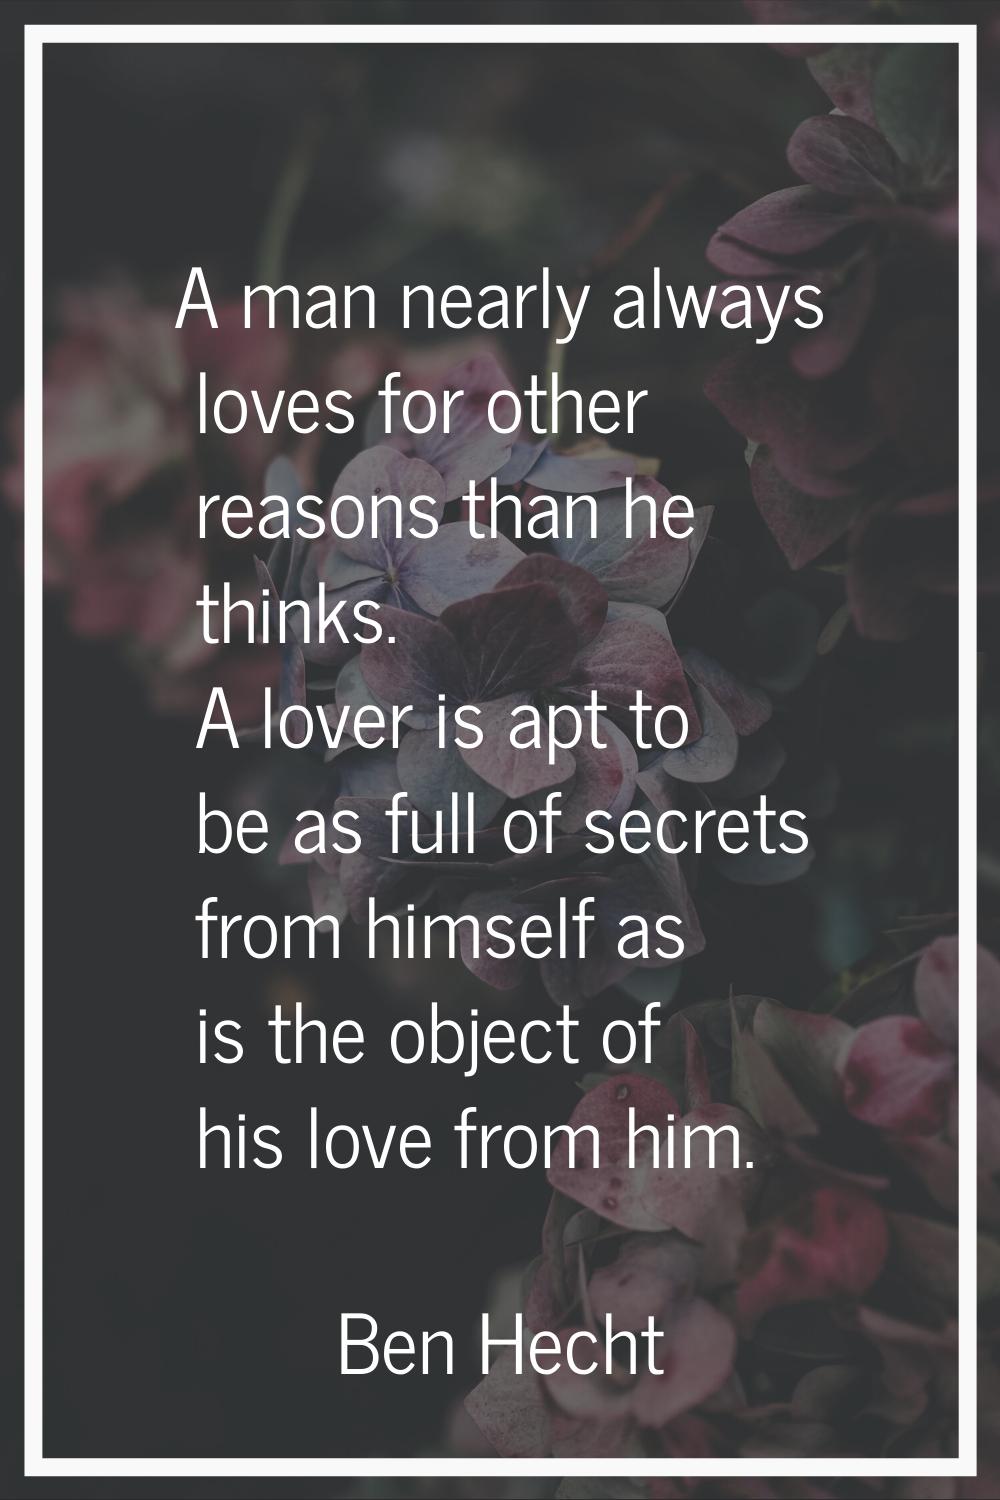 A man nearly always loves for other reasons than he thinks. A lover is apt to be as full of secrets